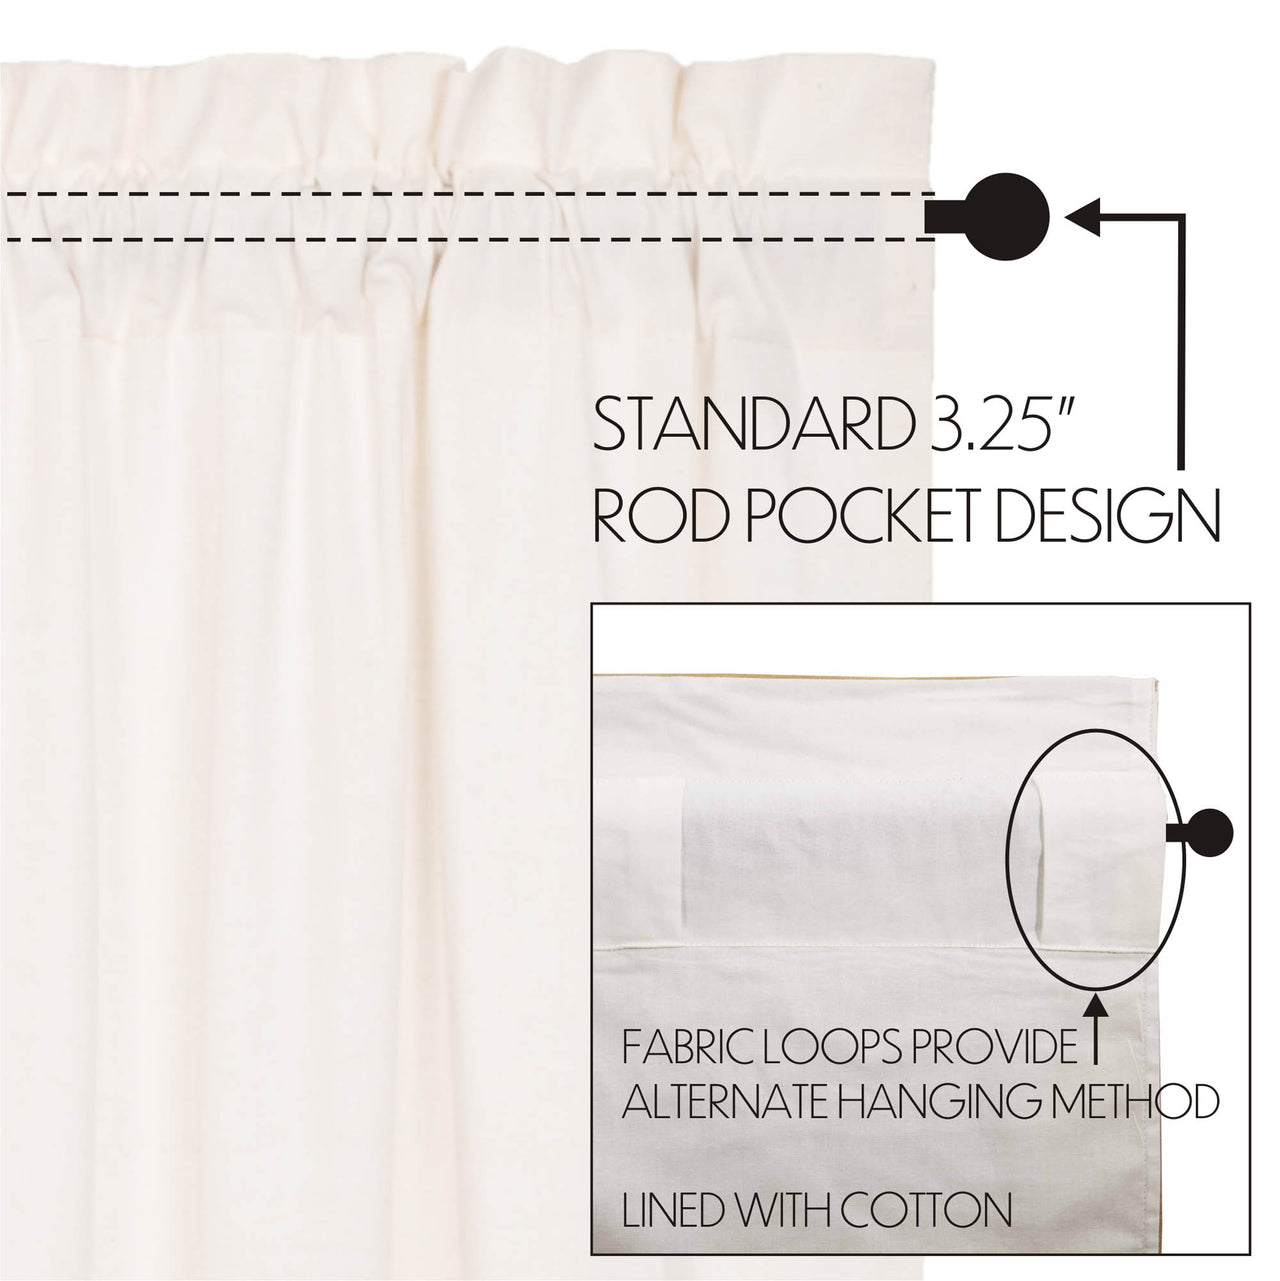 Simple Life Flax Antique White Ruffled Panel Curtain 96"x40" VHC Brands